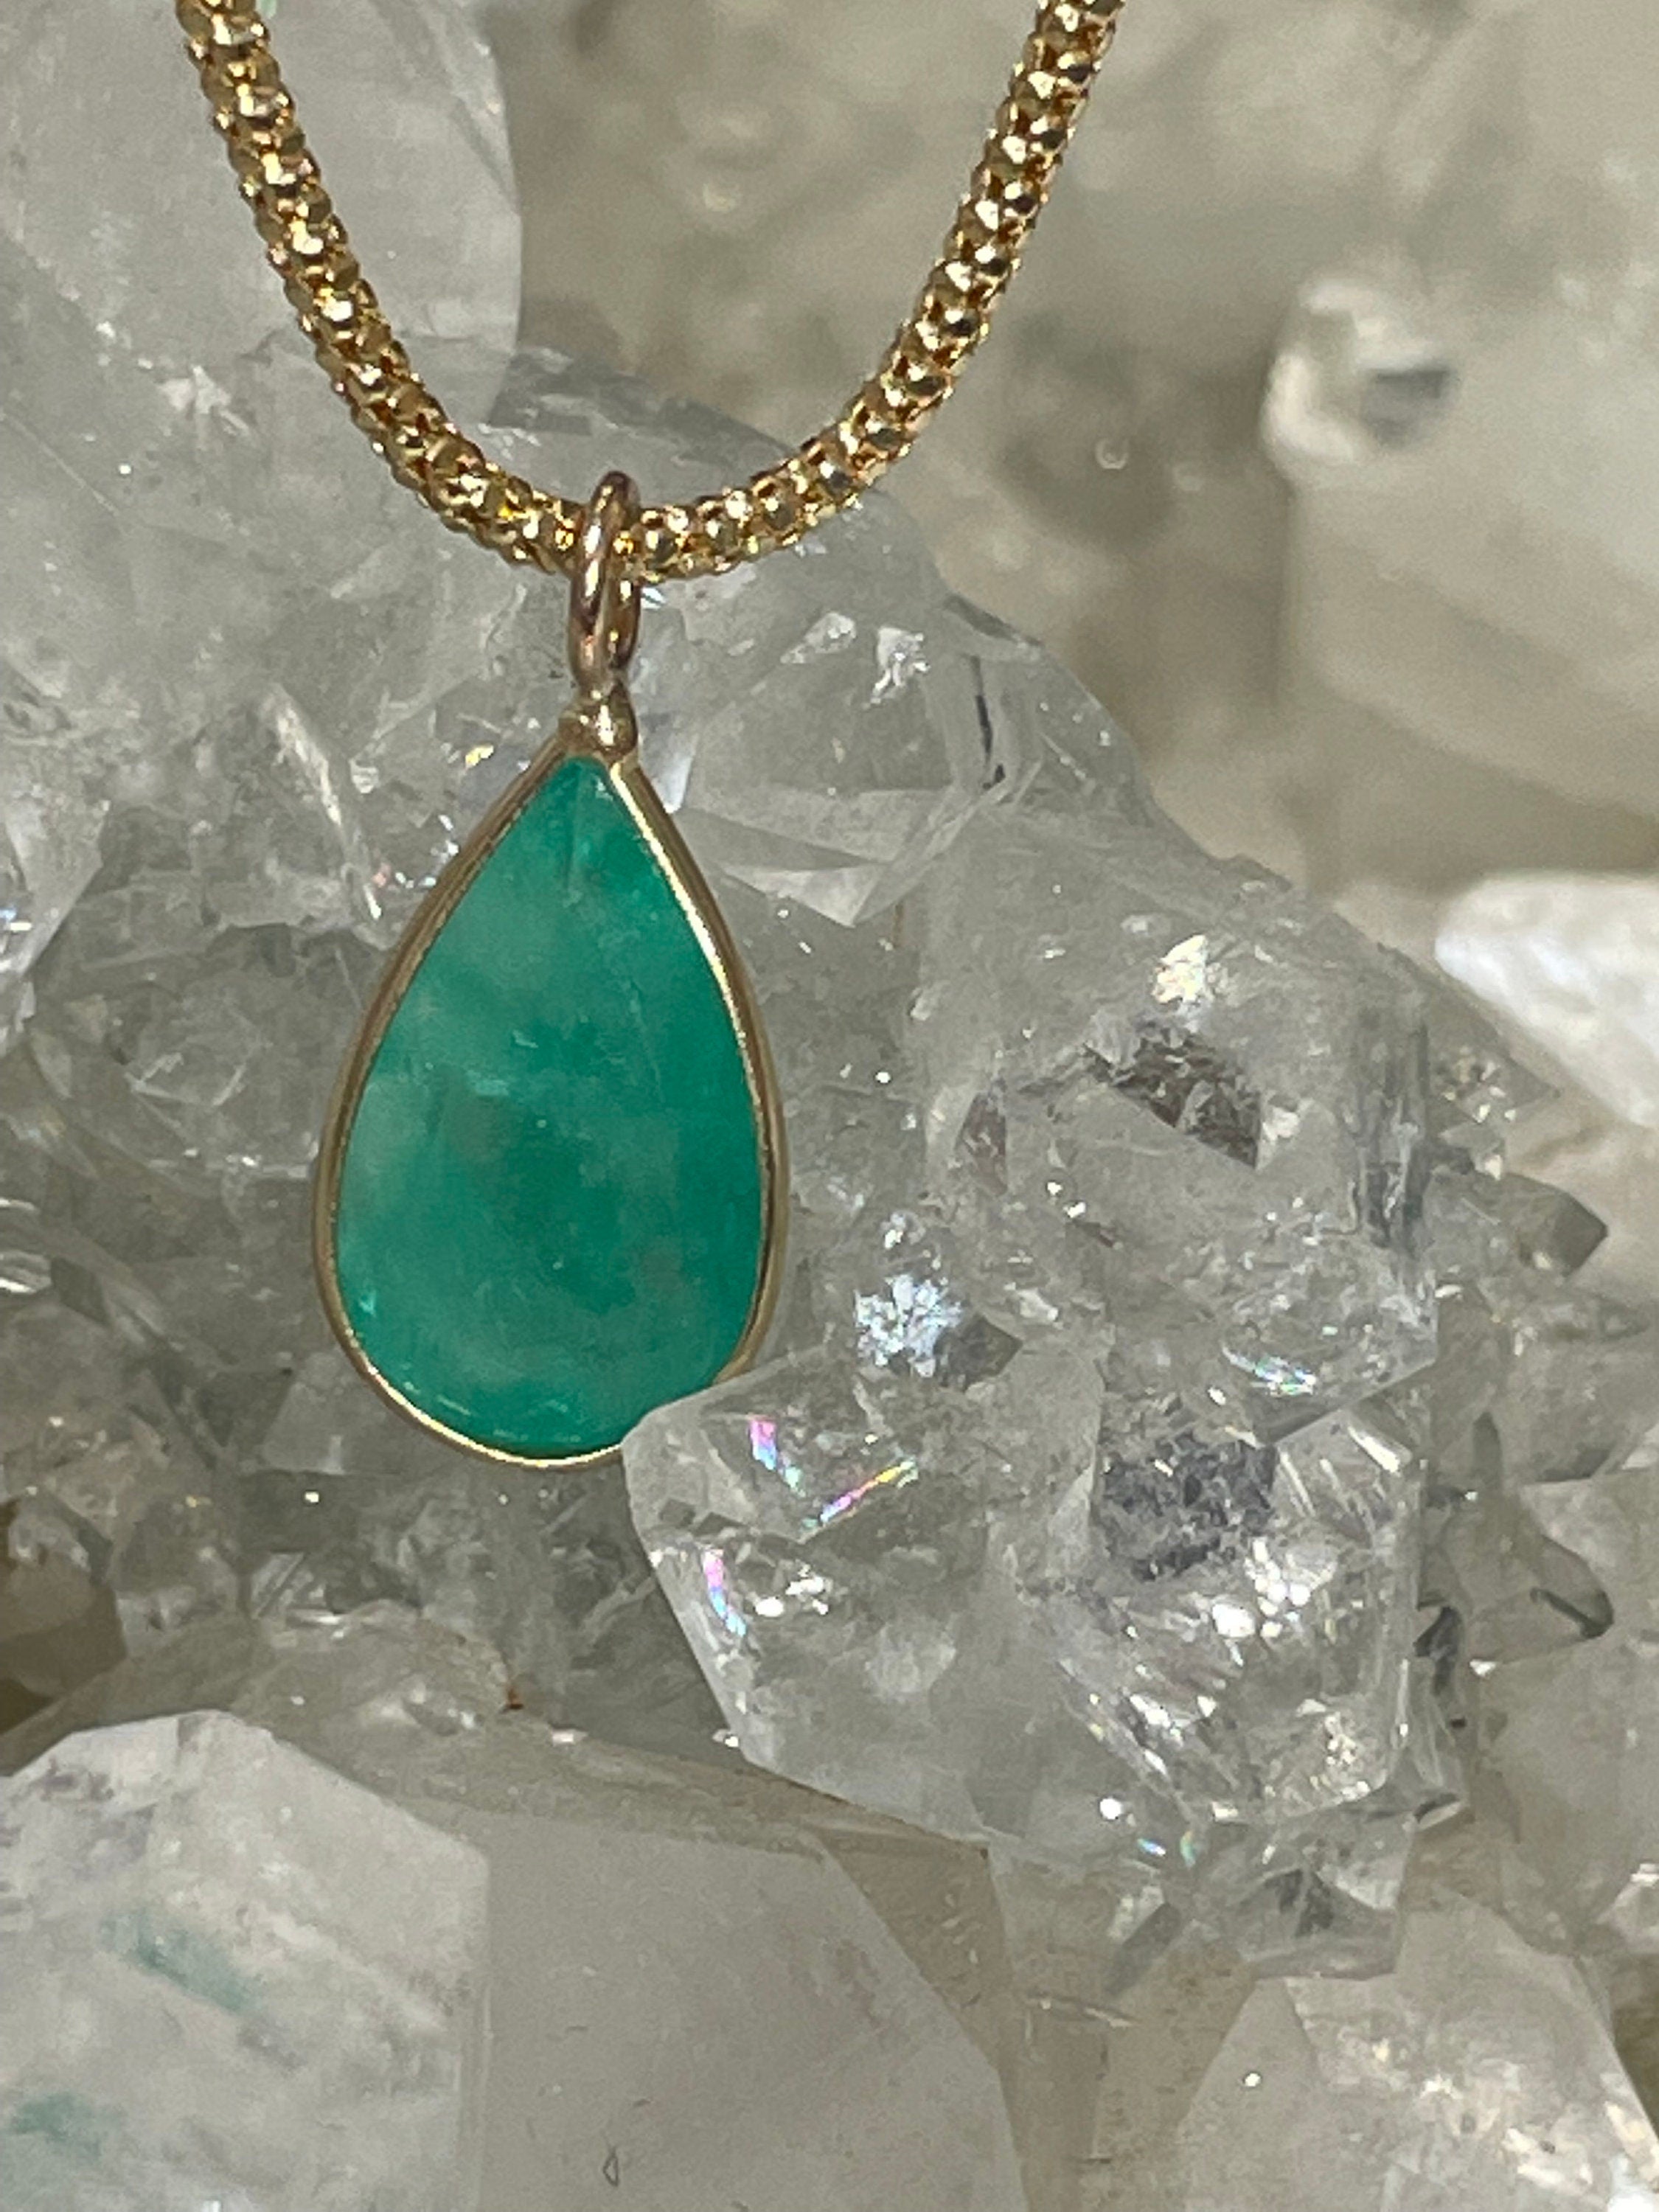 Glowing Green 4.5CT Natural Colombian Emerald 14K Yellow Gold Bezeled Charm Pendant OOAK 17x8mm